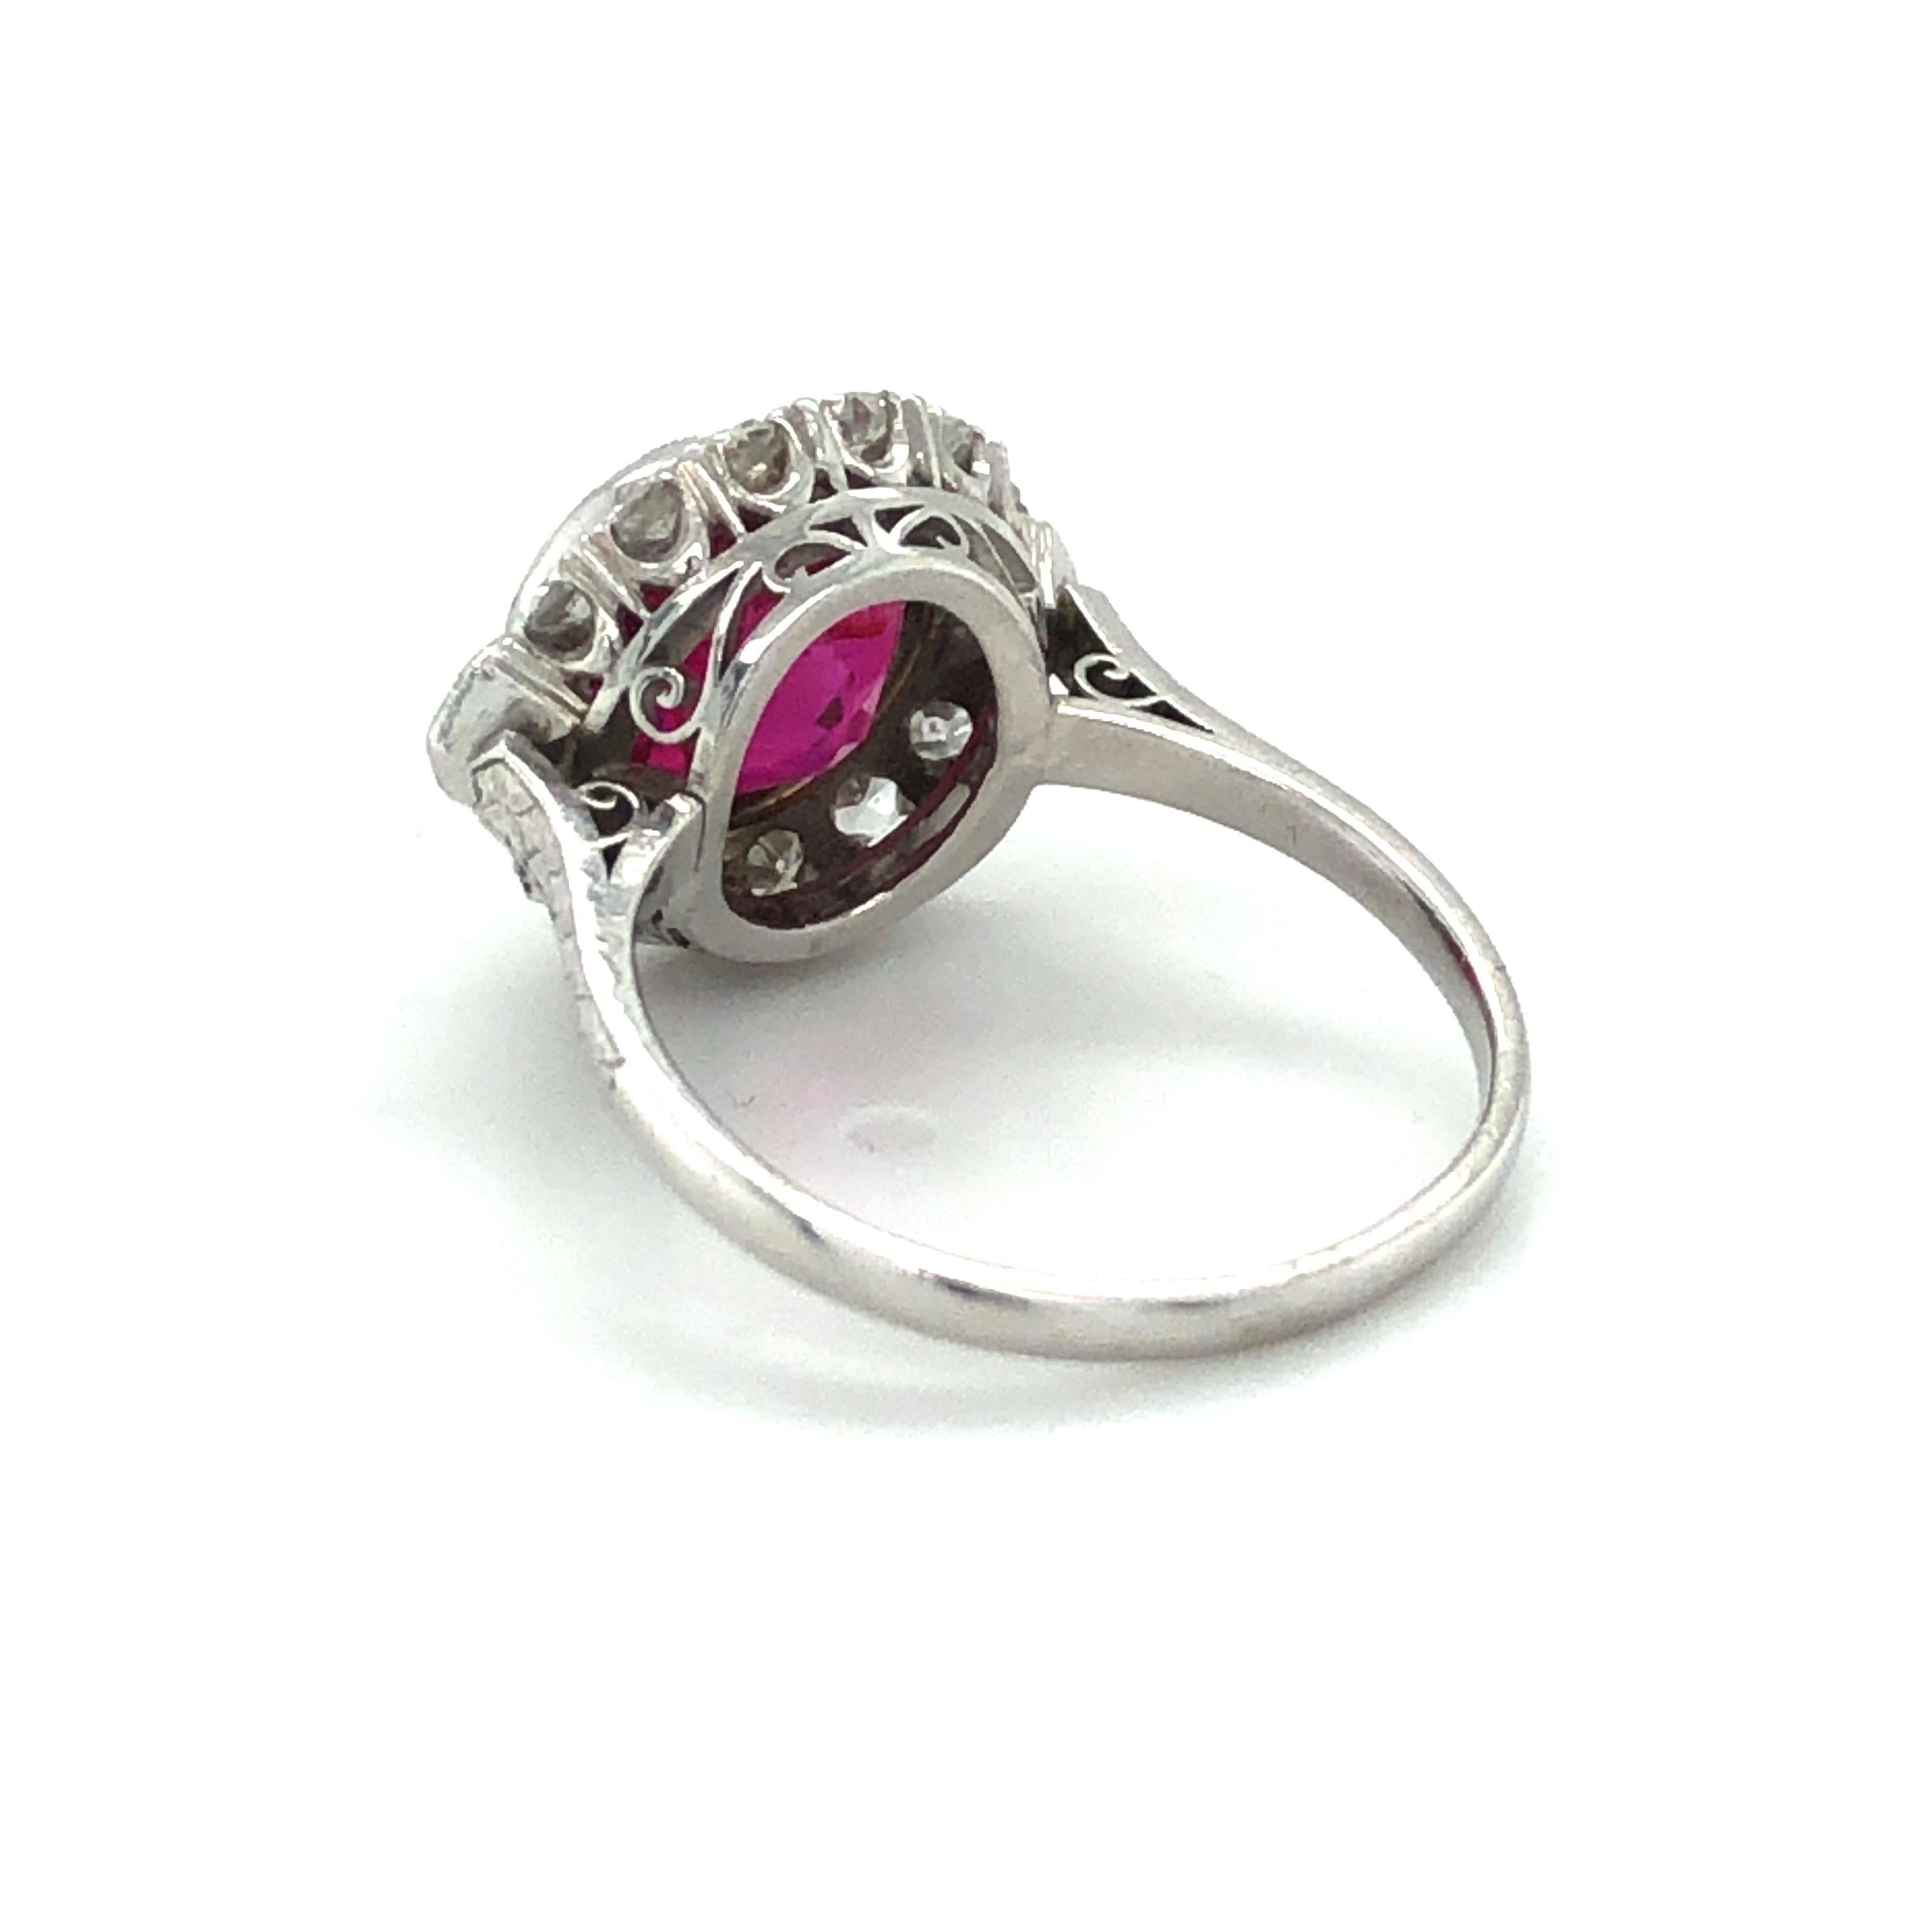 Fabulous Art Deco Ring with Burmese Ruby and Diamonds in Platinum 950 1